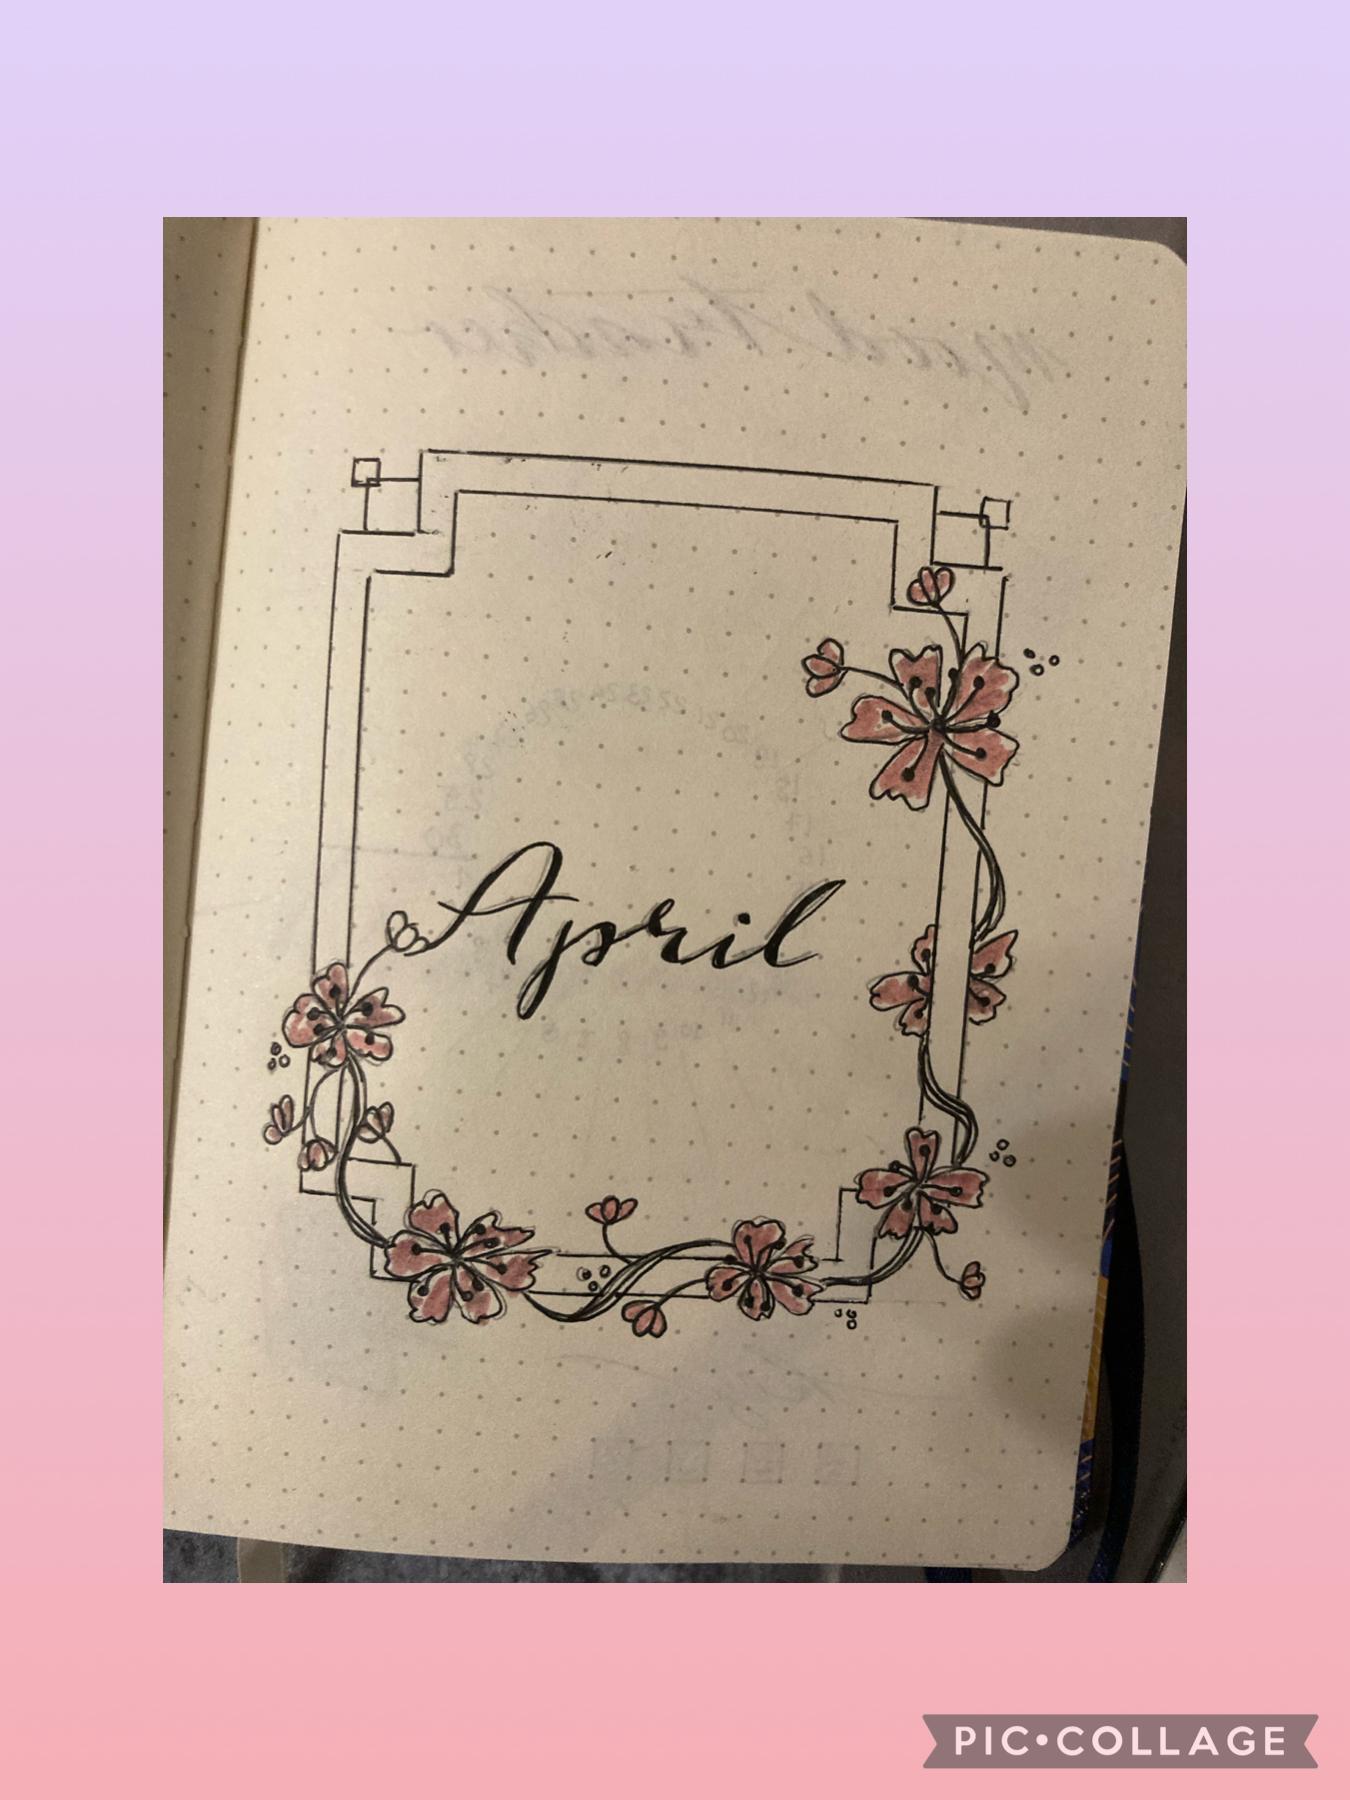 Hi! I’m posting you bullet journaling ideas. I begin with April, my birthday month. Hope you like it 🤗❤️